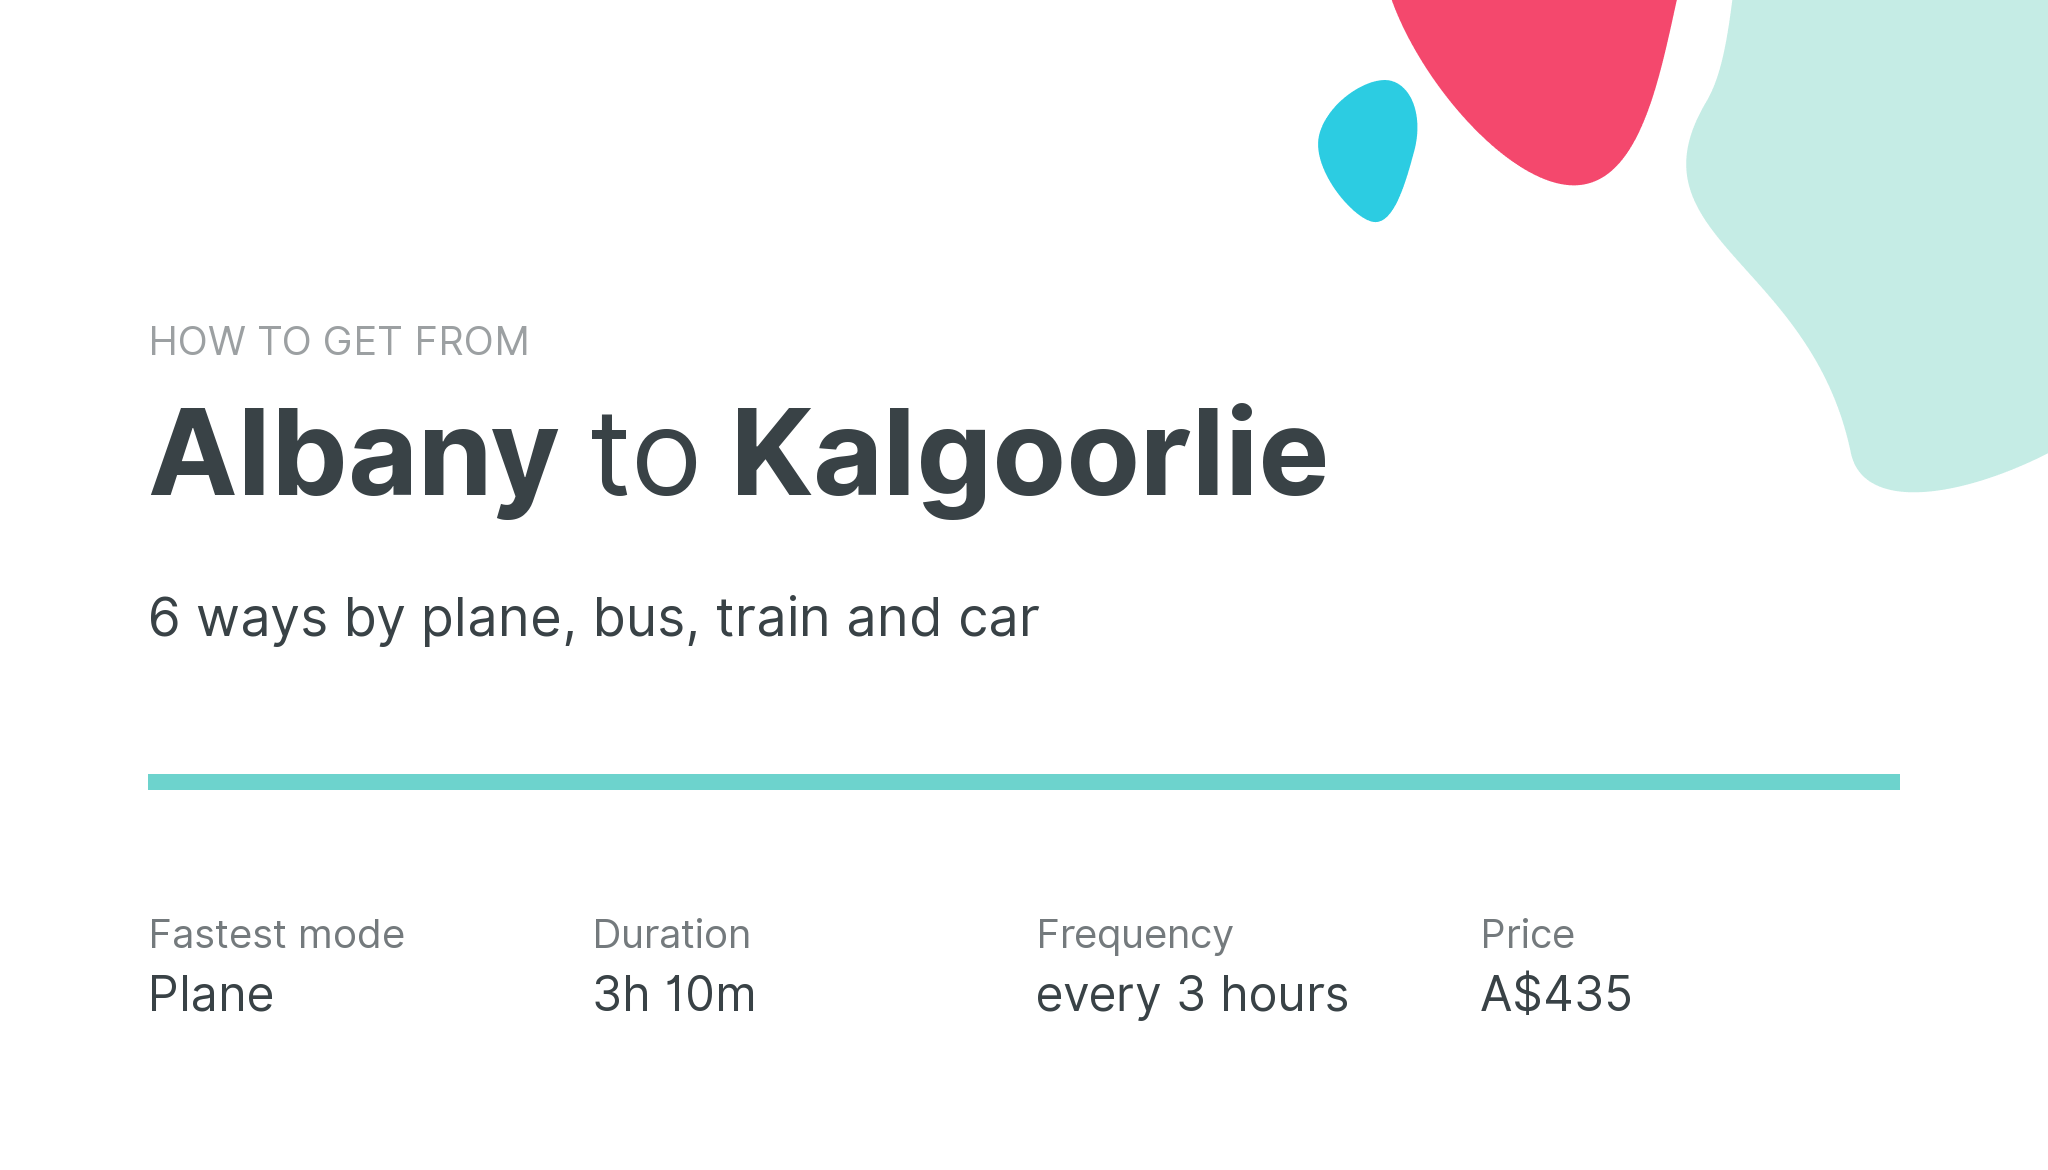 How do I get from Albany to Kalgoorlie